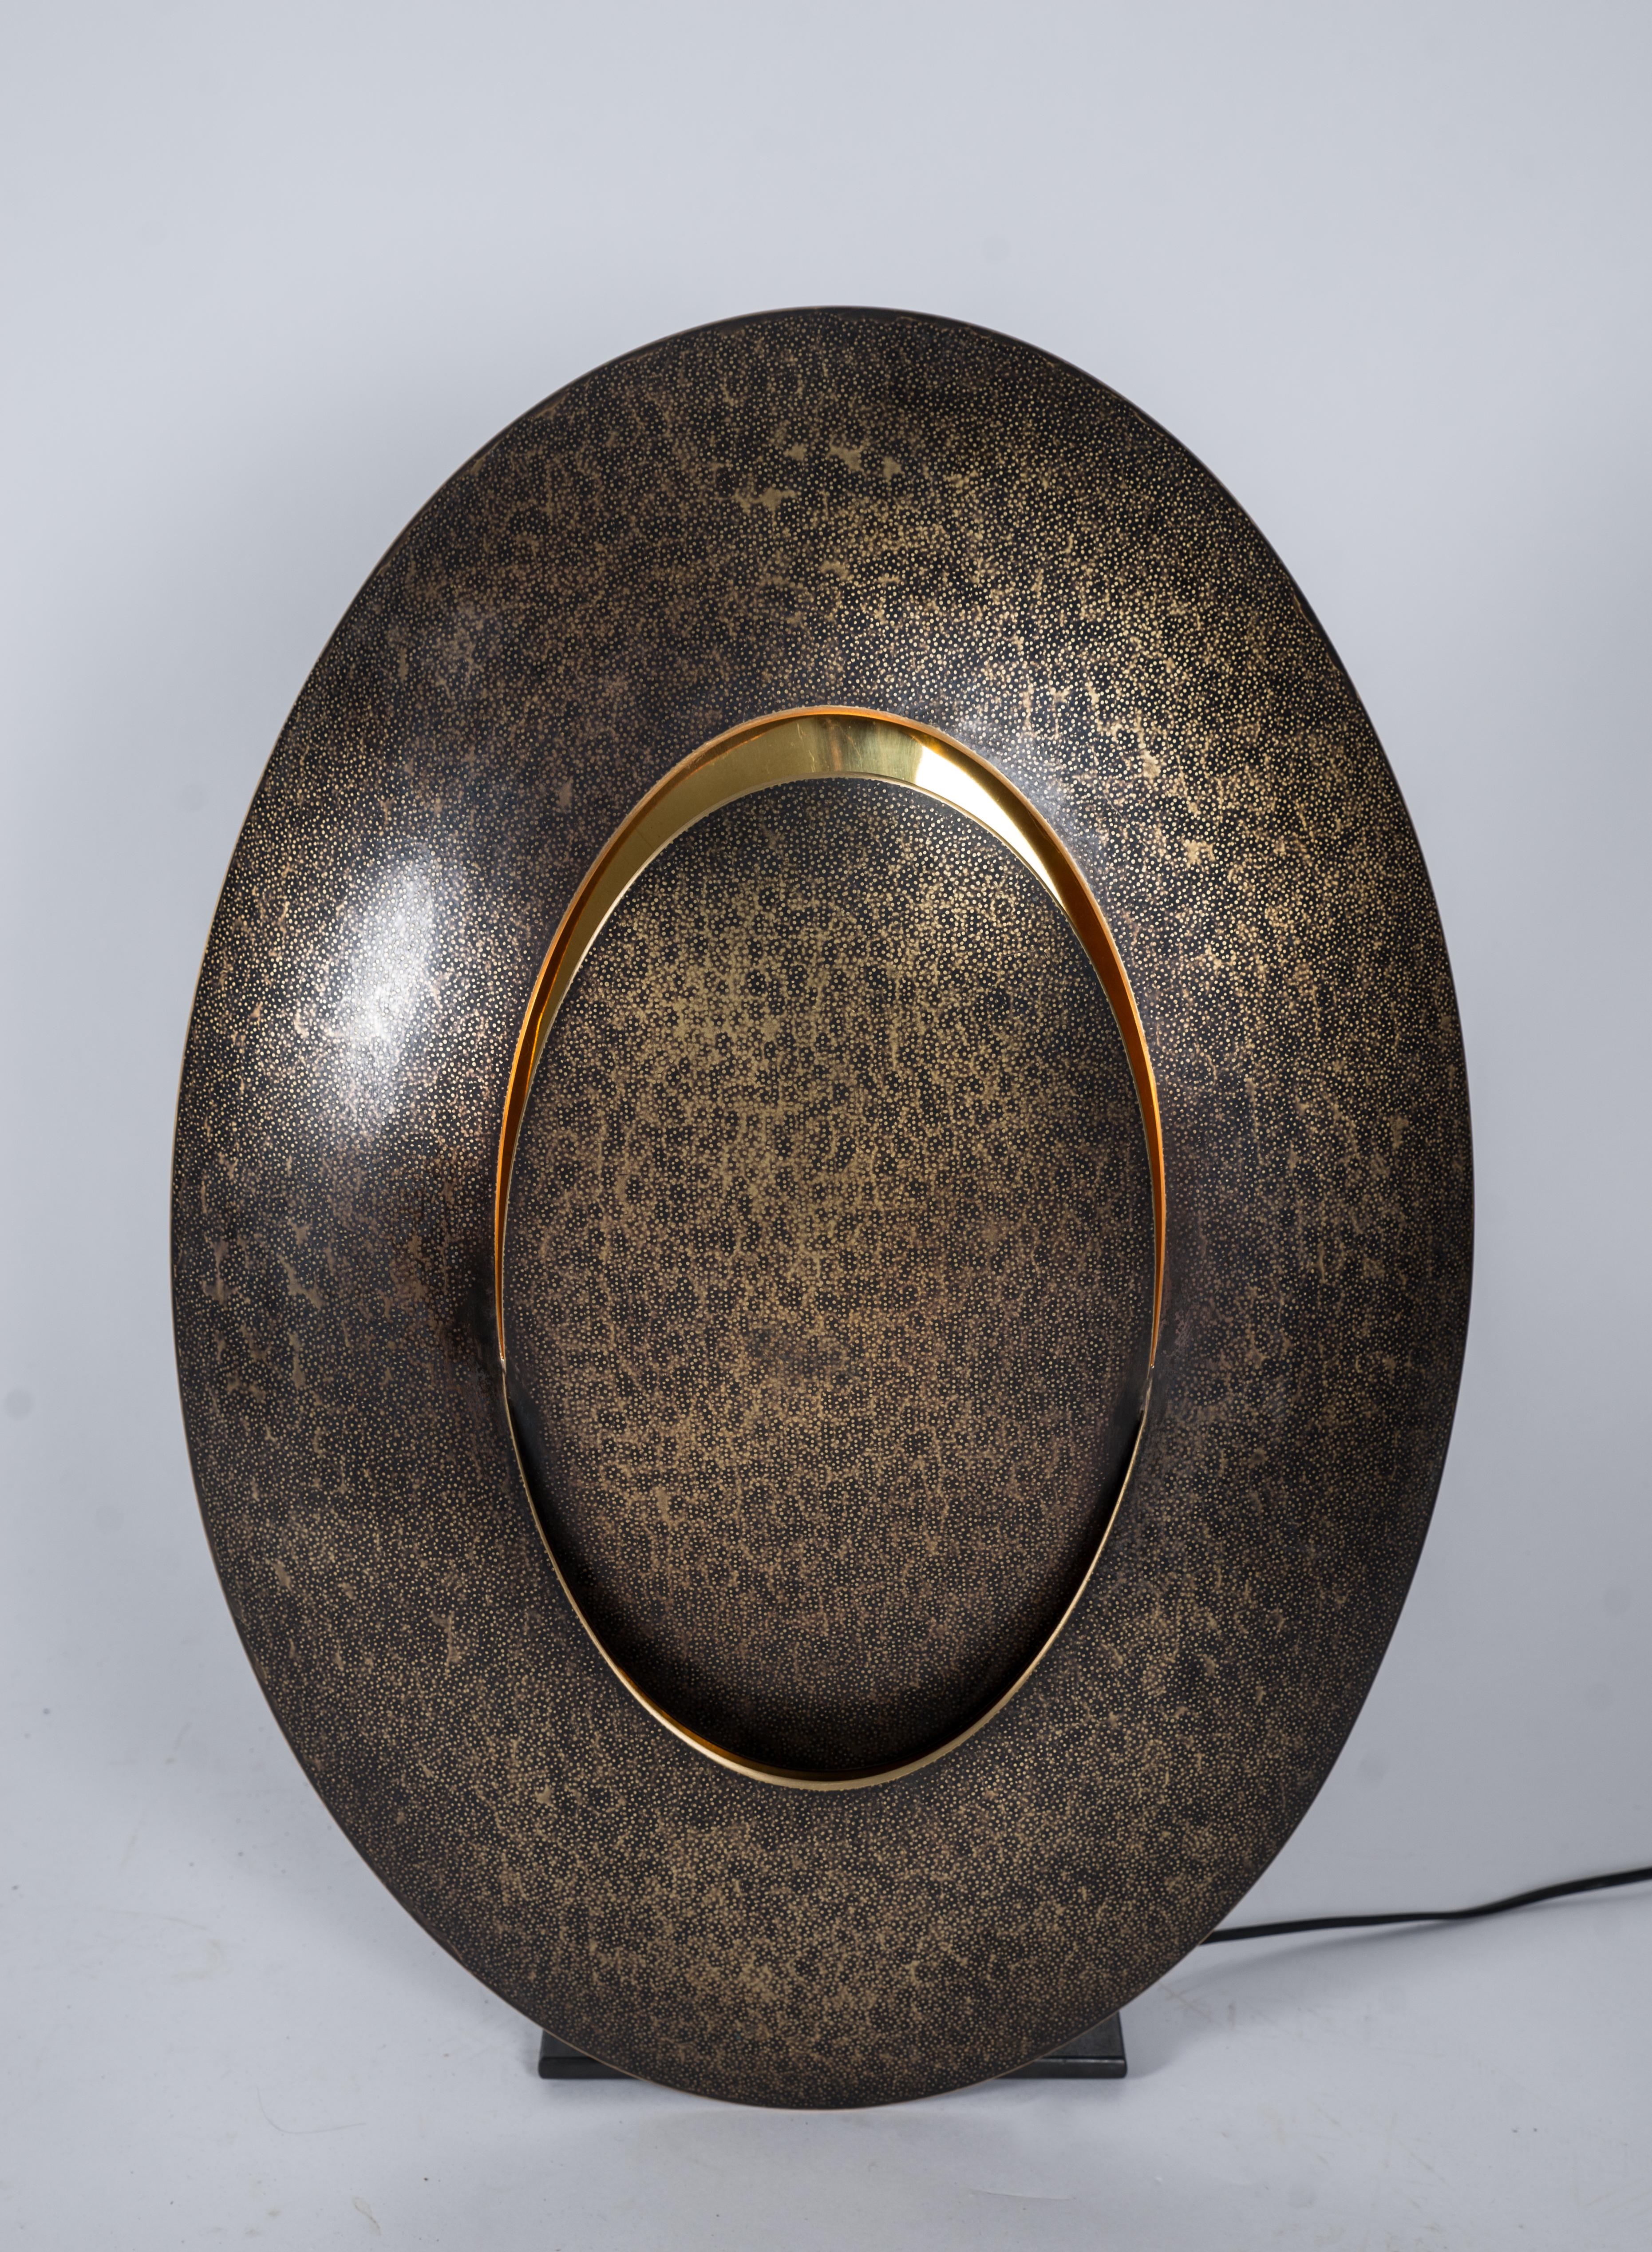 One large sconce, in polished brass, artist creation, France, Weigh: 8kg
About the artist:
Graduate in ceramic design and metal sculpture (2001, 2003), he worked during two years with the sculptor Hervé Wahlen in his workshop .
Laureate of the